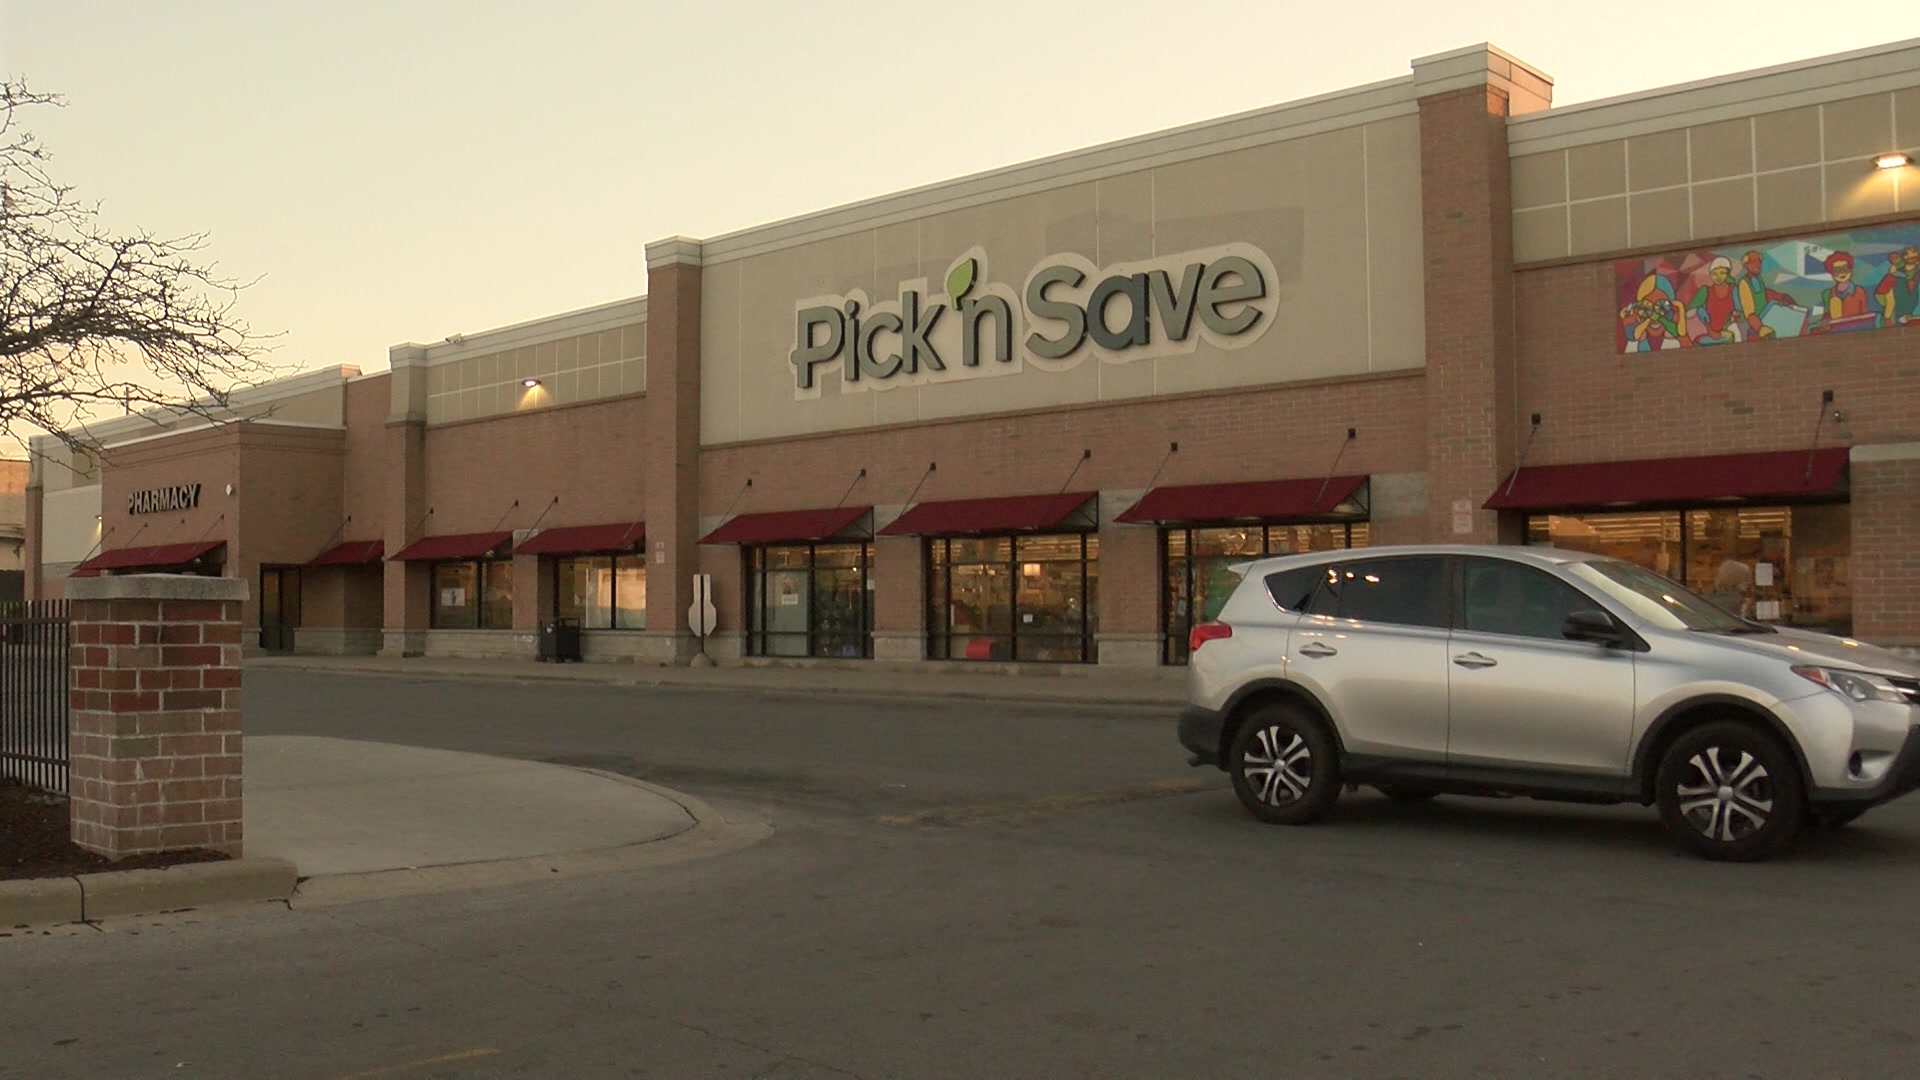 Pick ‘n Save Shuts Down Store Due to Mice Infestation: Temporary Closure, Partnership with Health Department to Ensure Safety